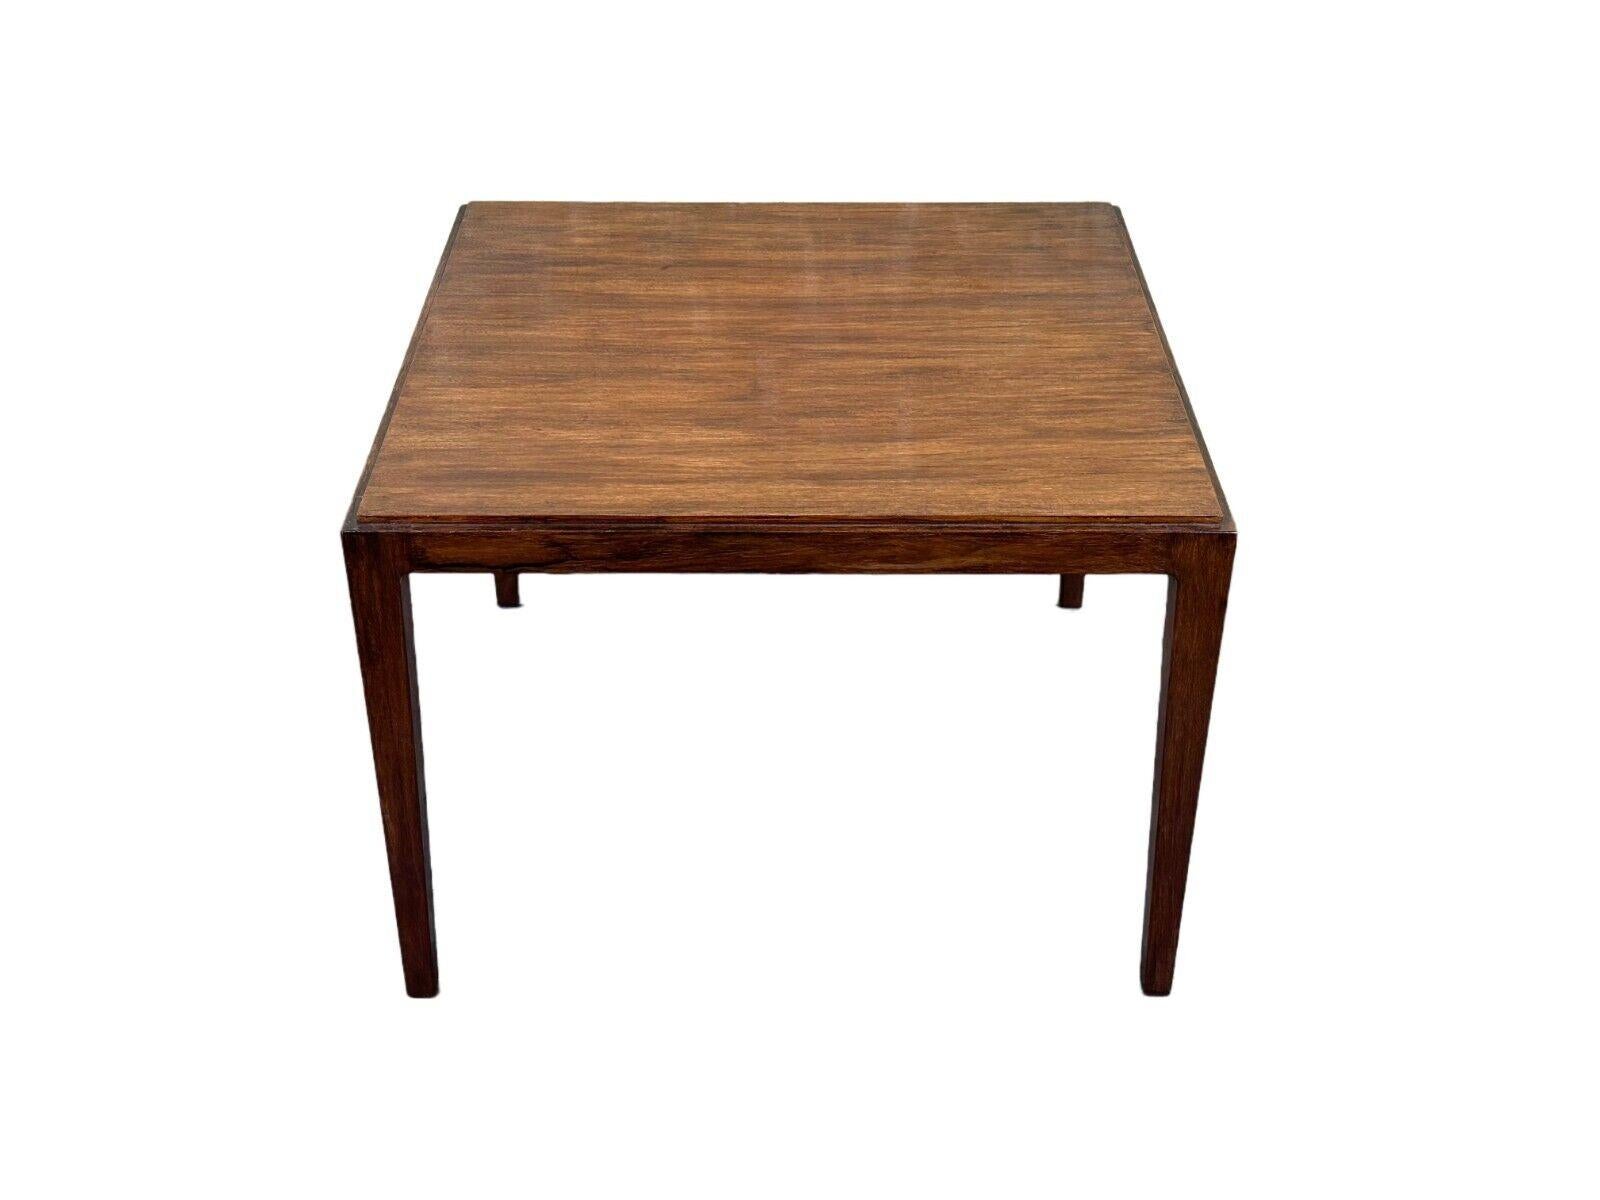 60s 70s Teak Table Side Table Coffee Table Danish Design Denmark

Object: table

Manufacturer:

Condition: good

Age: around 1960-1970

Dimensions:

Width = 65.5cm
Depth = 65.5cm
Height = 47cm

Other notes:

The pictures serve as